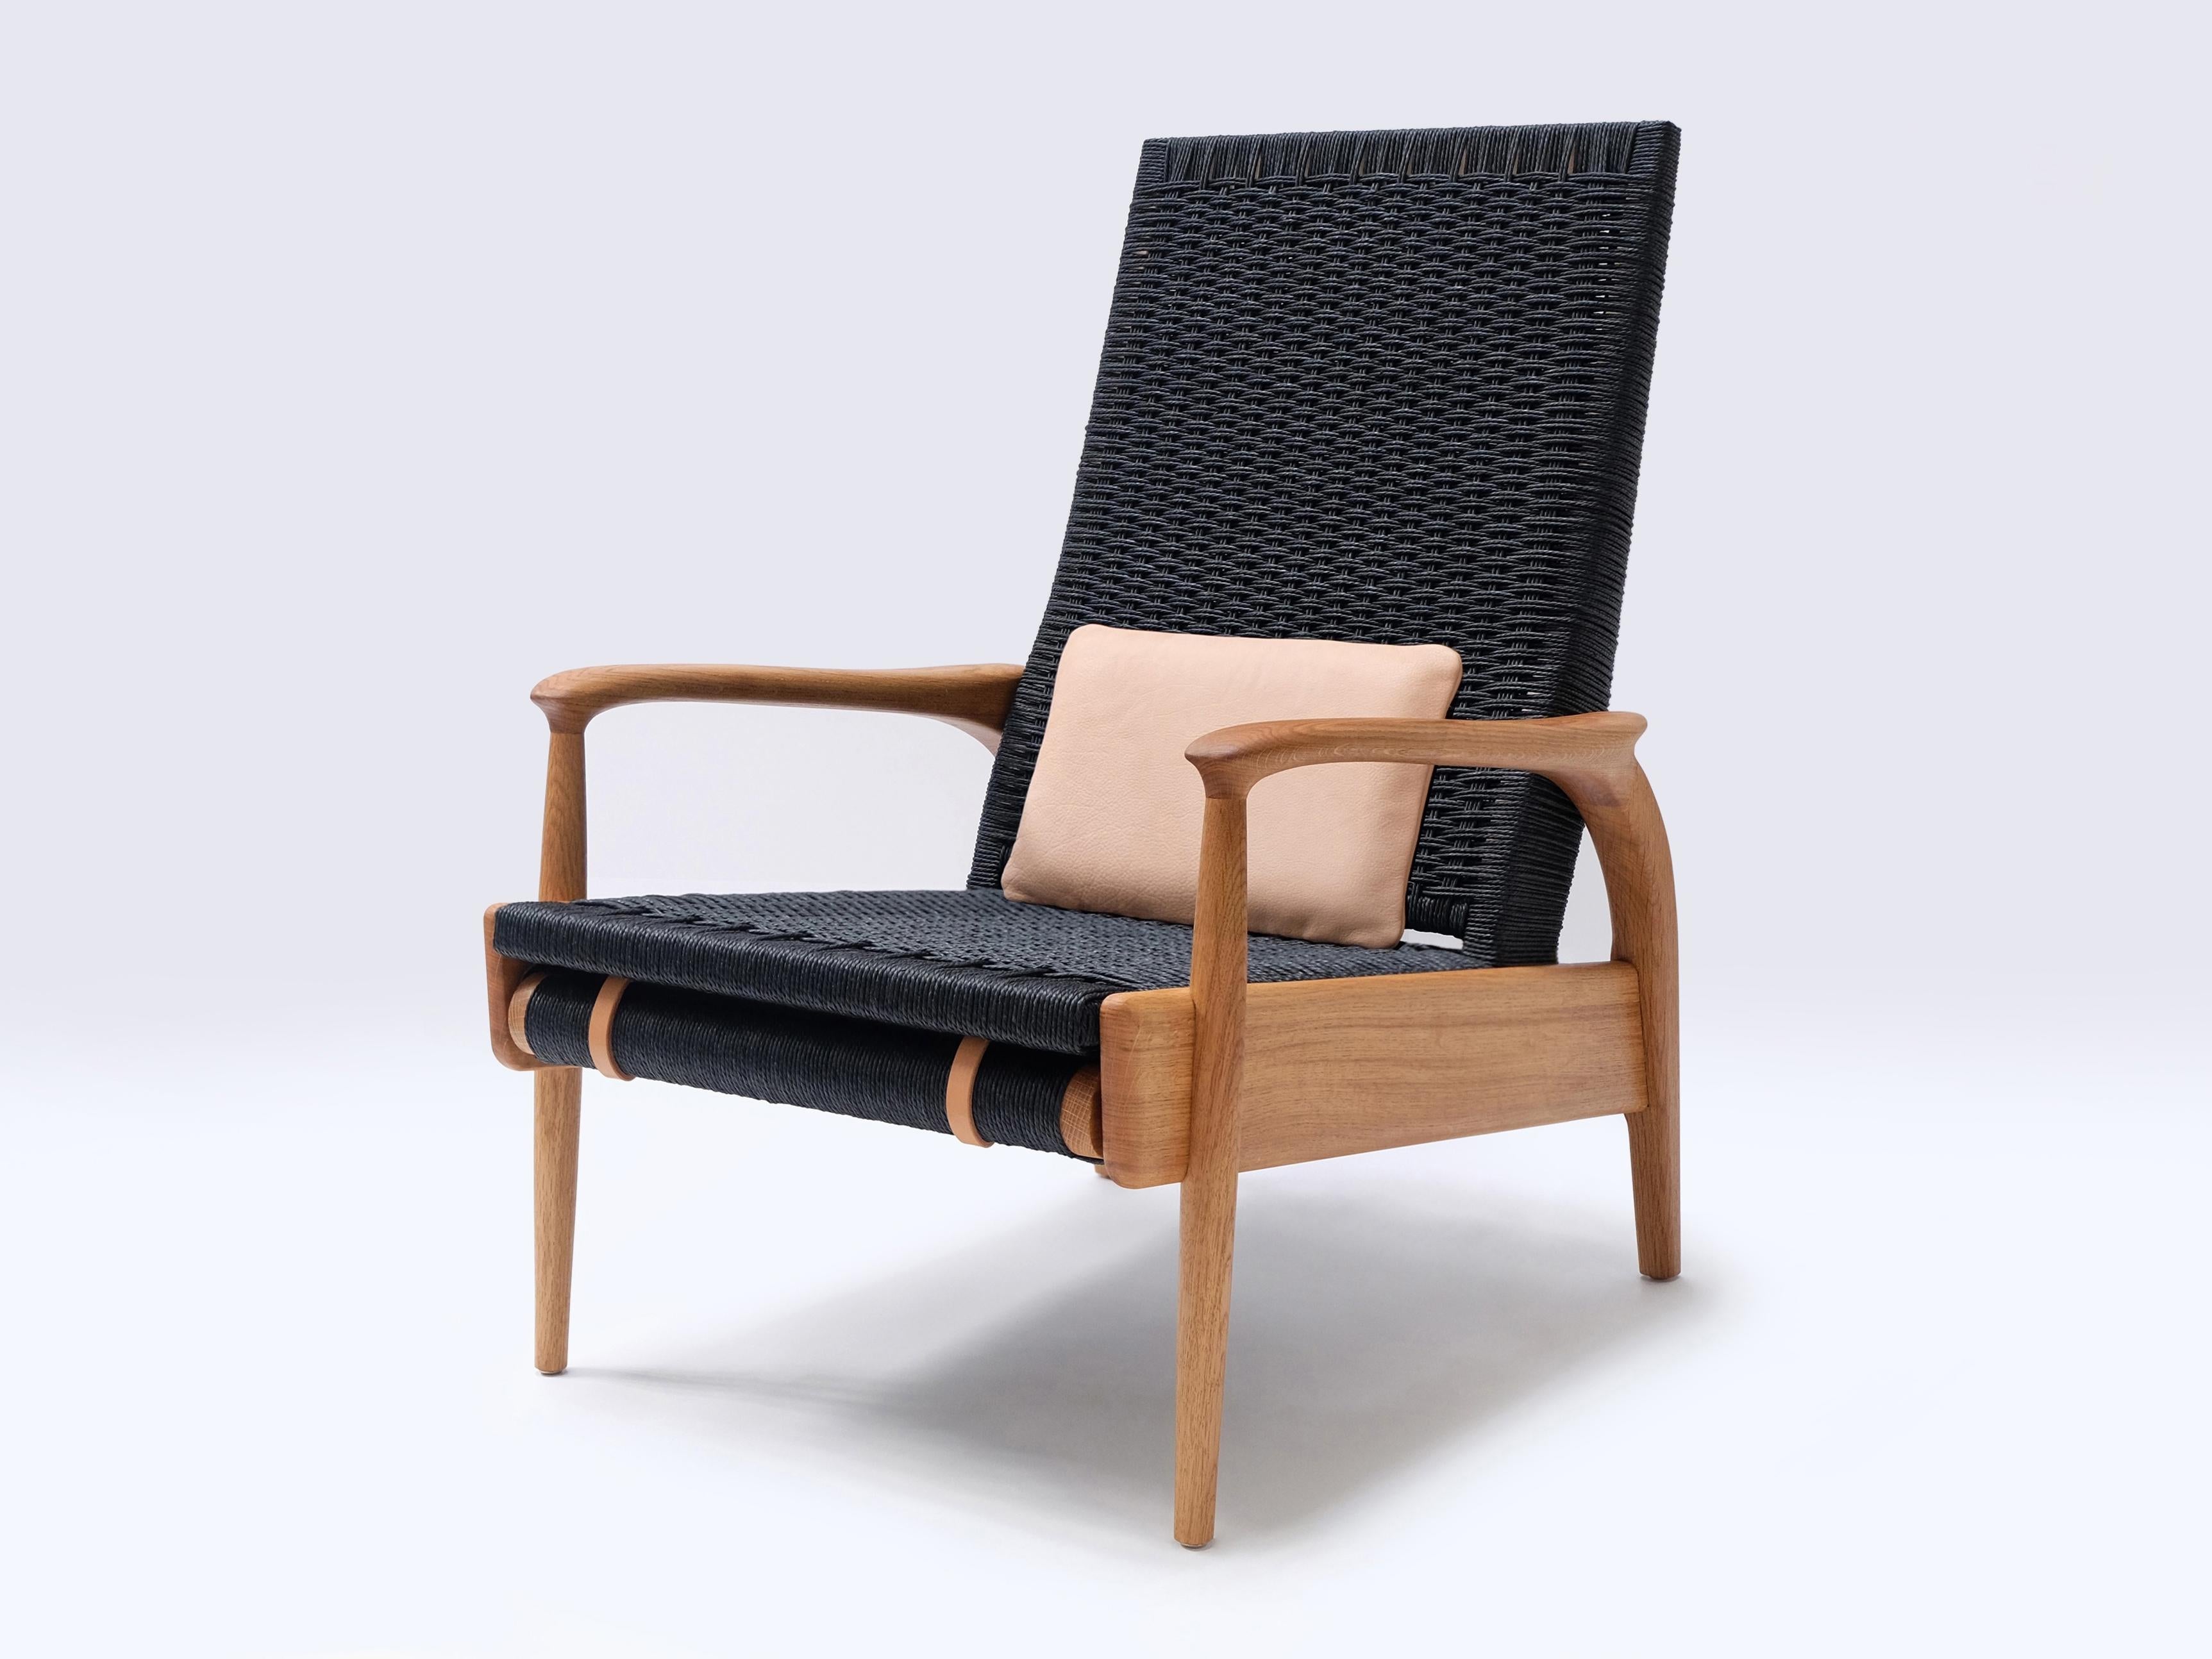 Custom-Made Handcrafted Reclining Lounge Chair in Oiled Oak& Black Danish Cord For Sale 1